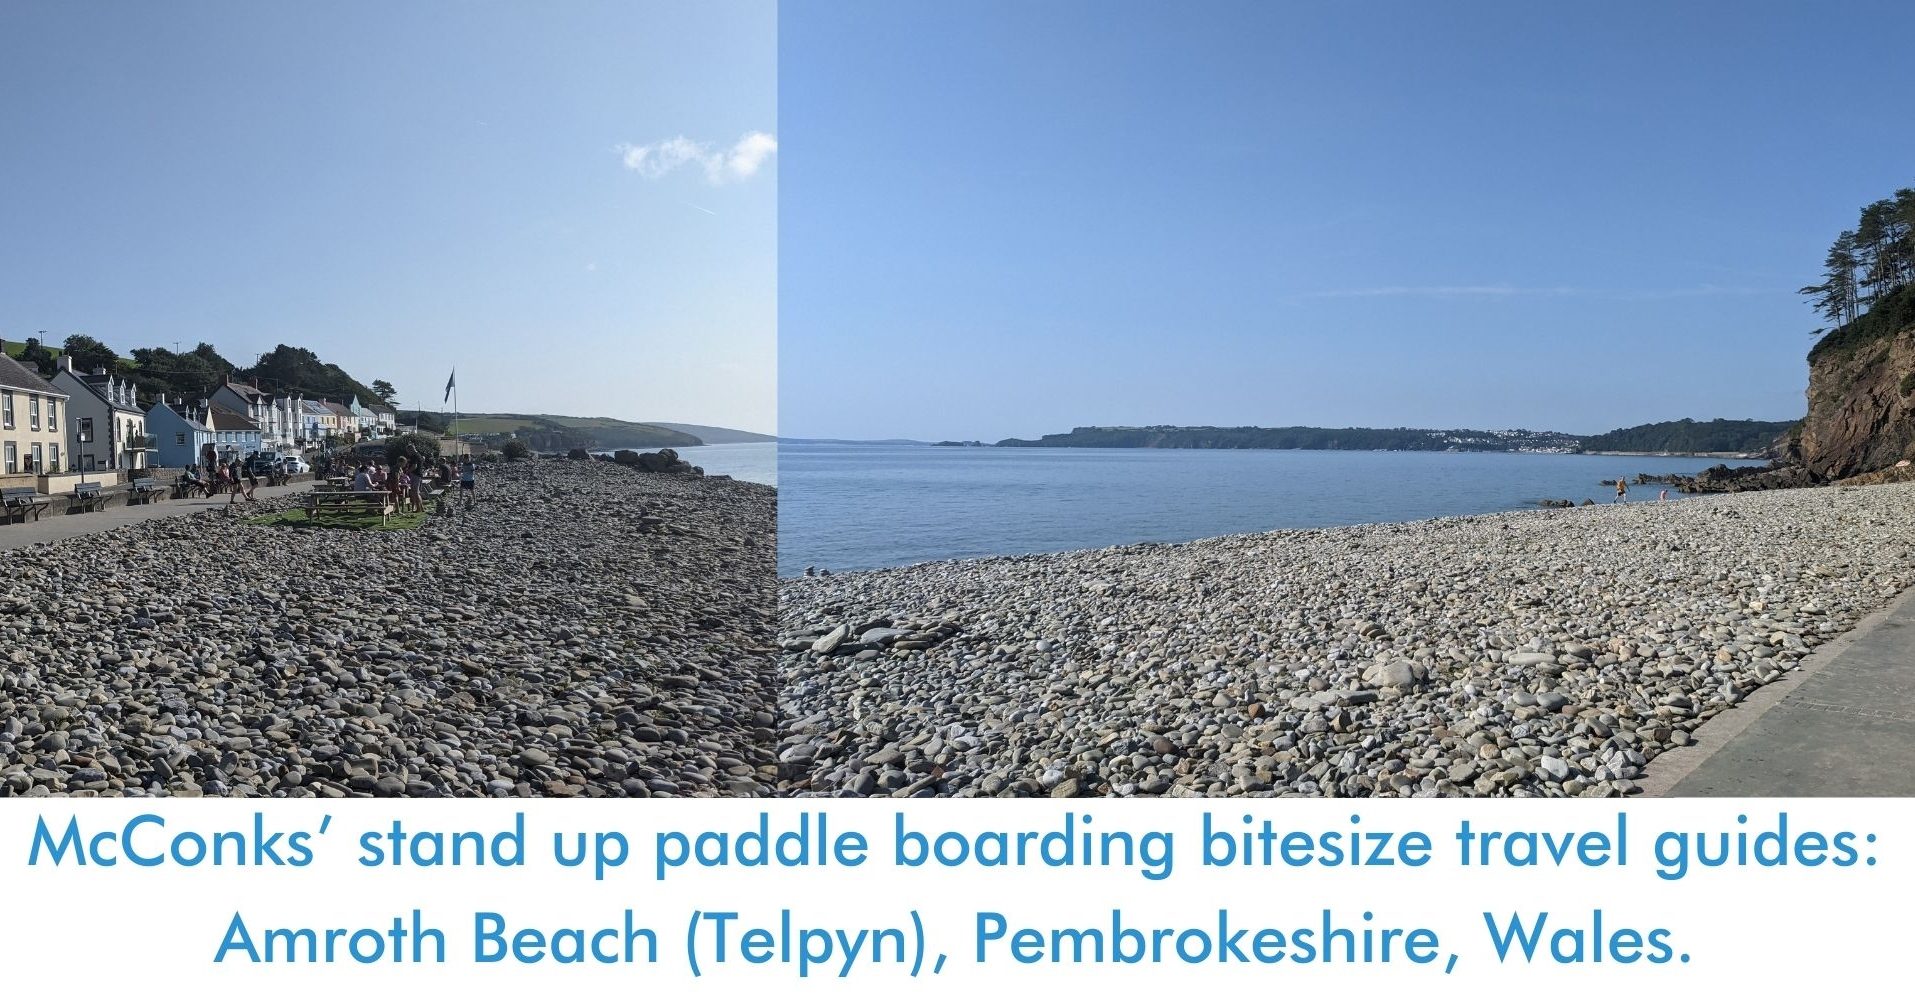 You are currently viewing McConks’ stand up paddle boarding bitesize travel guides: Amroth Beach (Telpyn), Pembrokeshire, Wales.